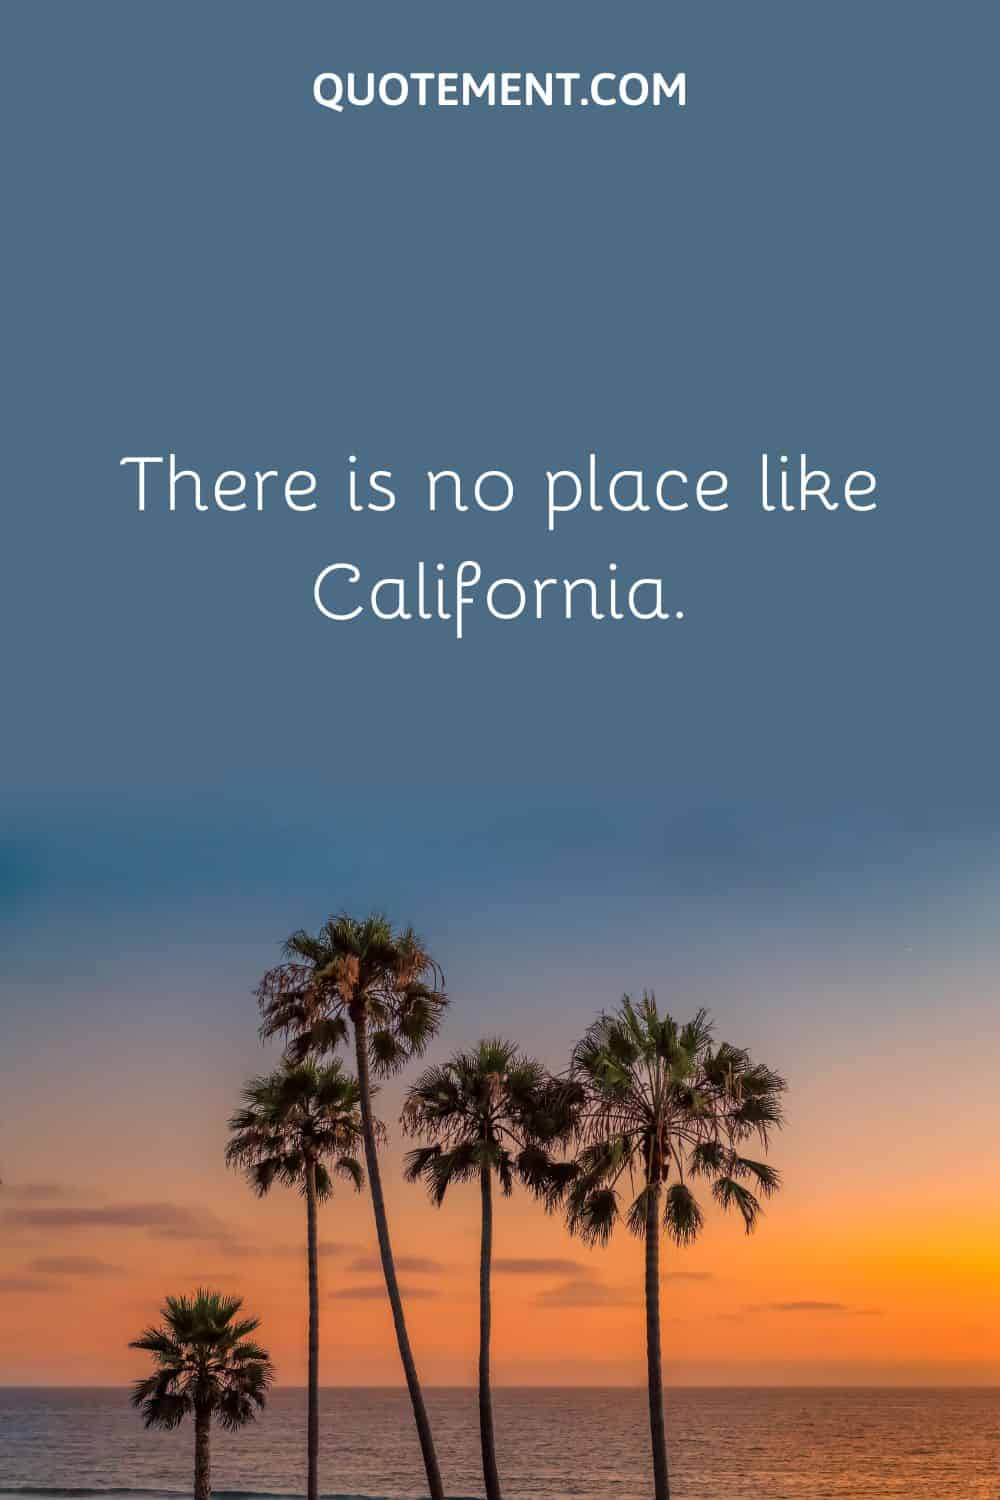 There is no place like California